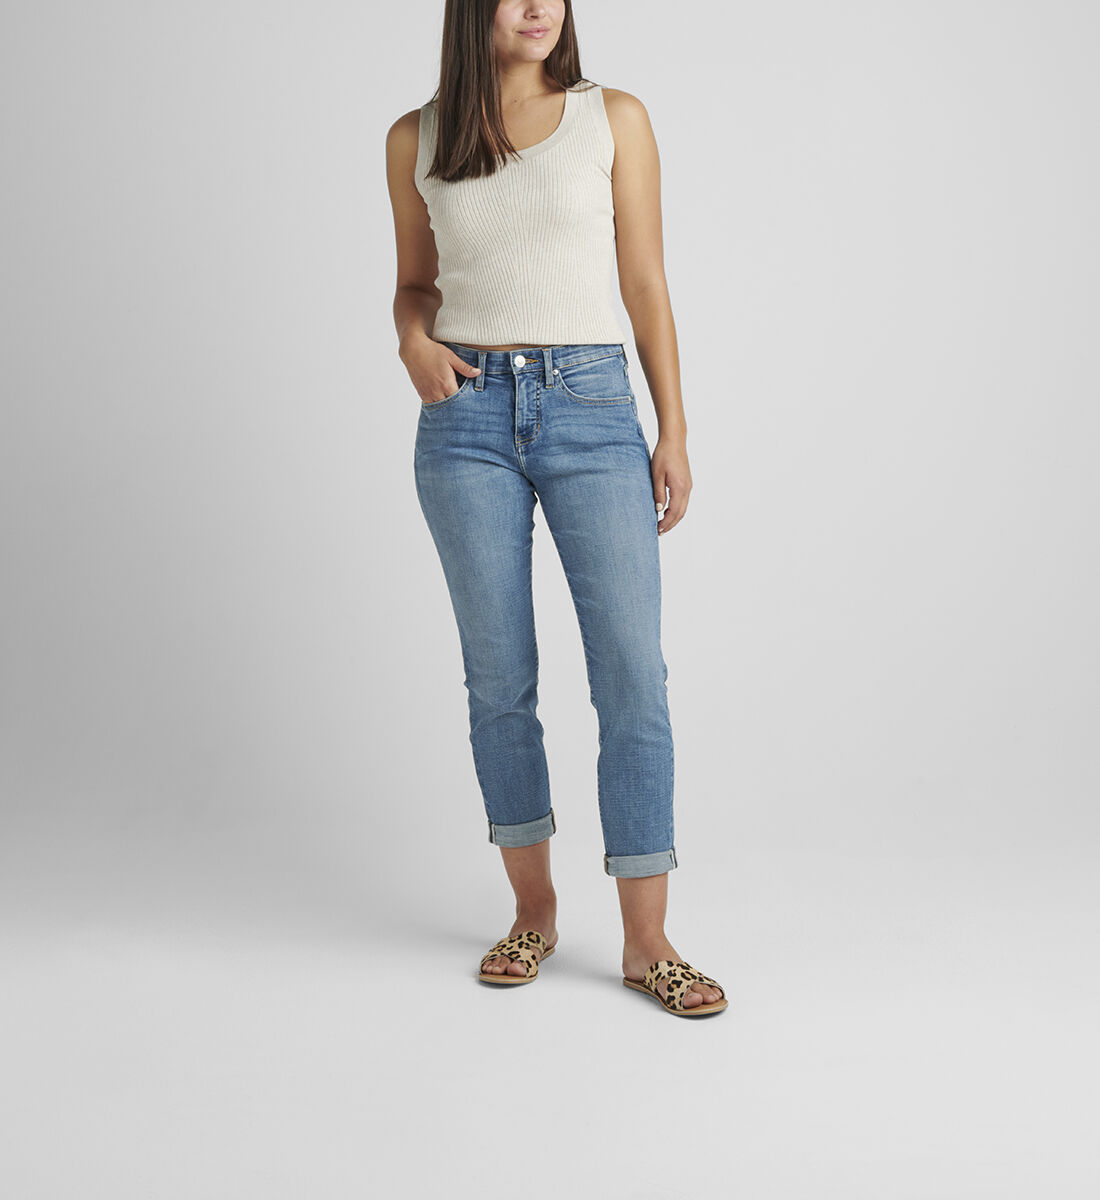 Buy Carter Mid Rise Girlfriend Jeans for CAD 98.00 | Jag Jeans CA New